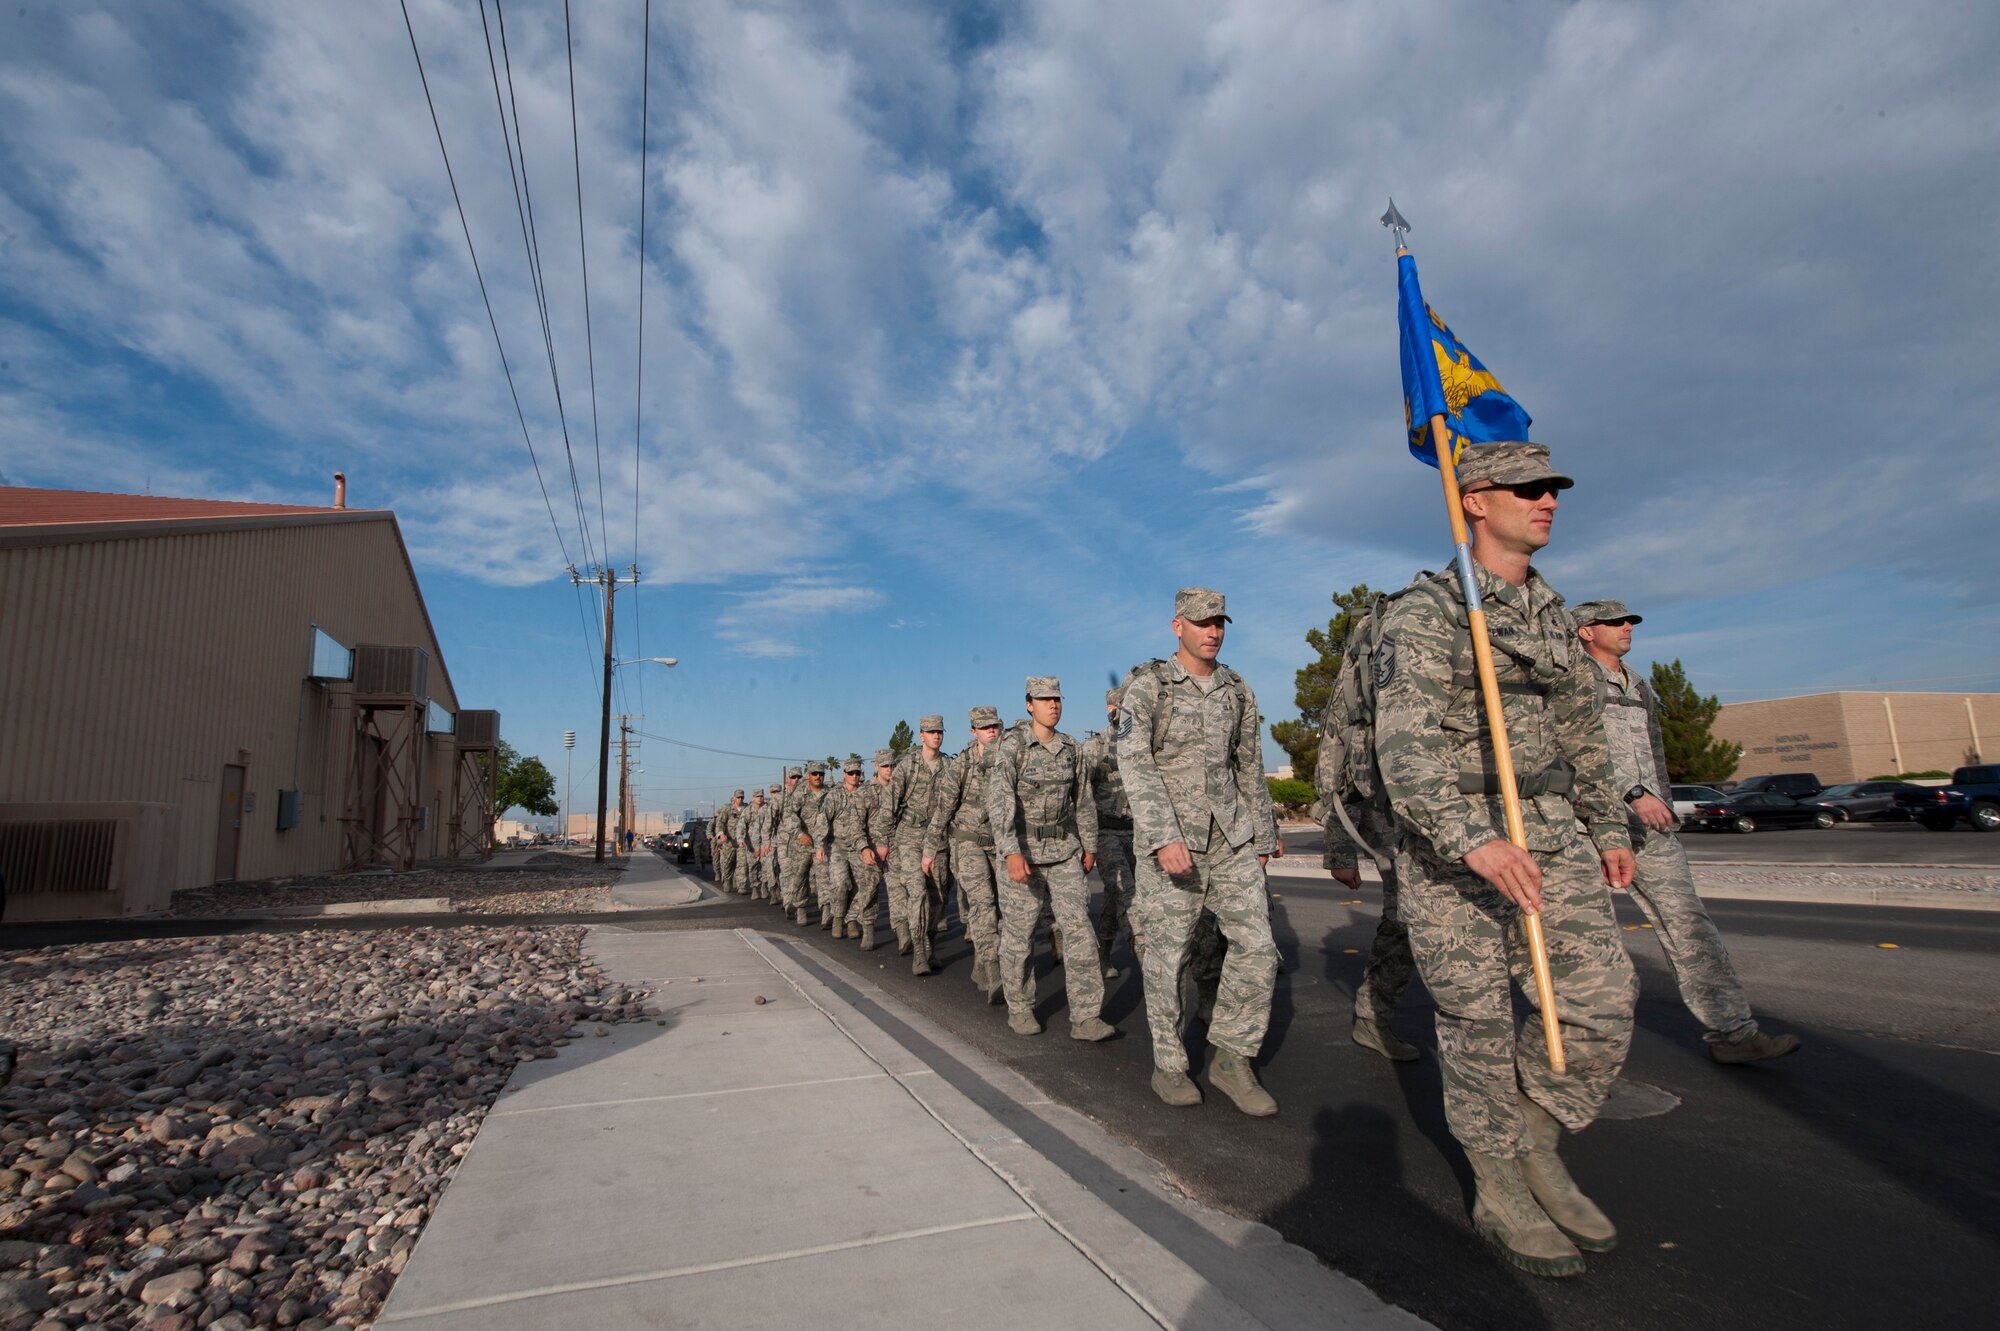 Airmen assigned to the 99th Security Forces Squadron march down the road halfway through the National Police Week 10K memorial ruck march at Nellis Air Force Base, Nev., May 13, 2015. Throughout the march, the formation stopped at various hydration stations and rendered honors to fallen security forces Airmen. (U.S. Air Force photo by Senior Airman Joshua Kleinholz)